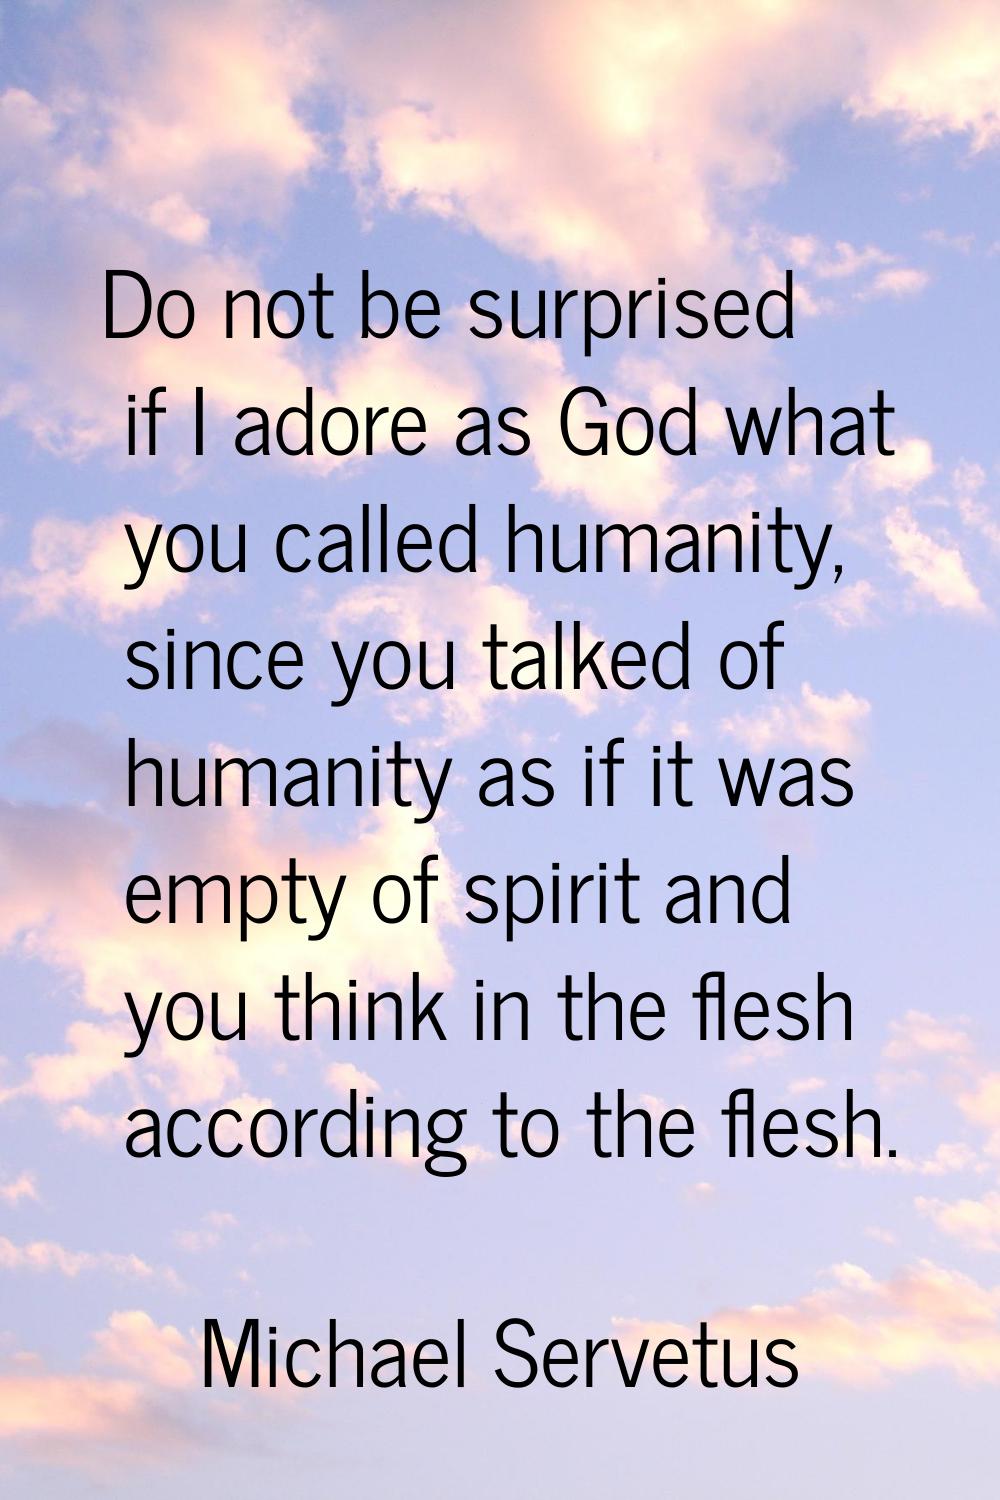 Do not be surprised if I adore as God what you called humanity, since you talked of humanity as if 